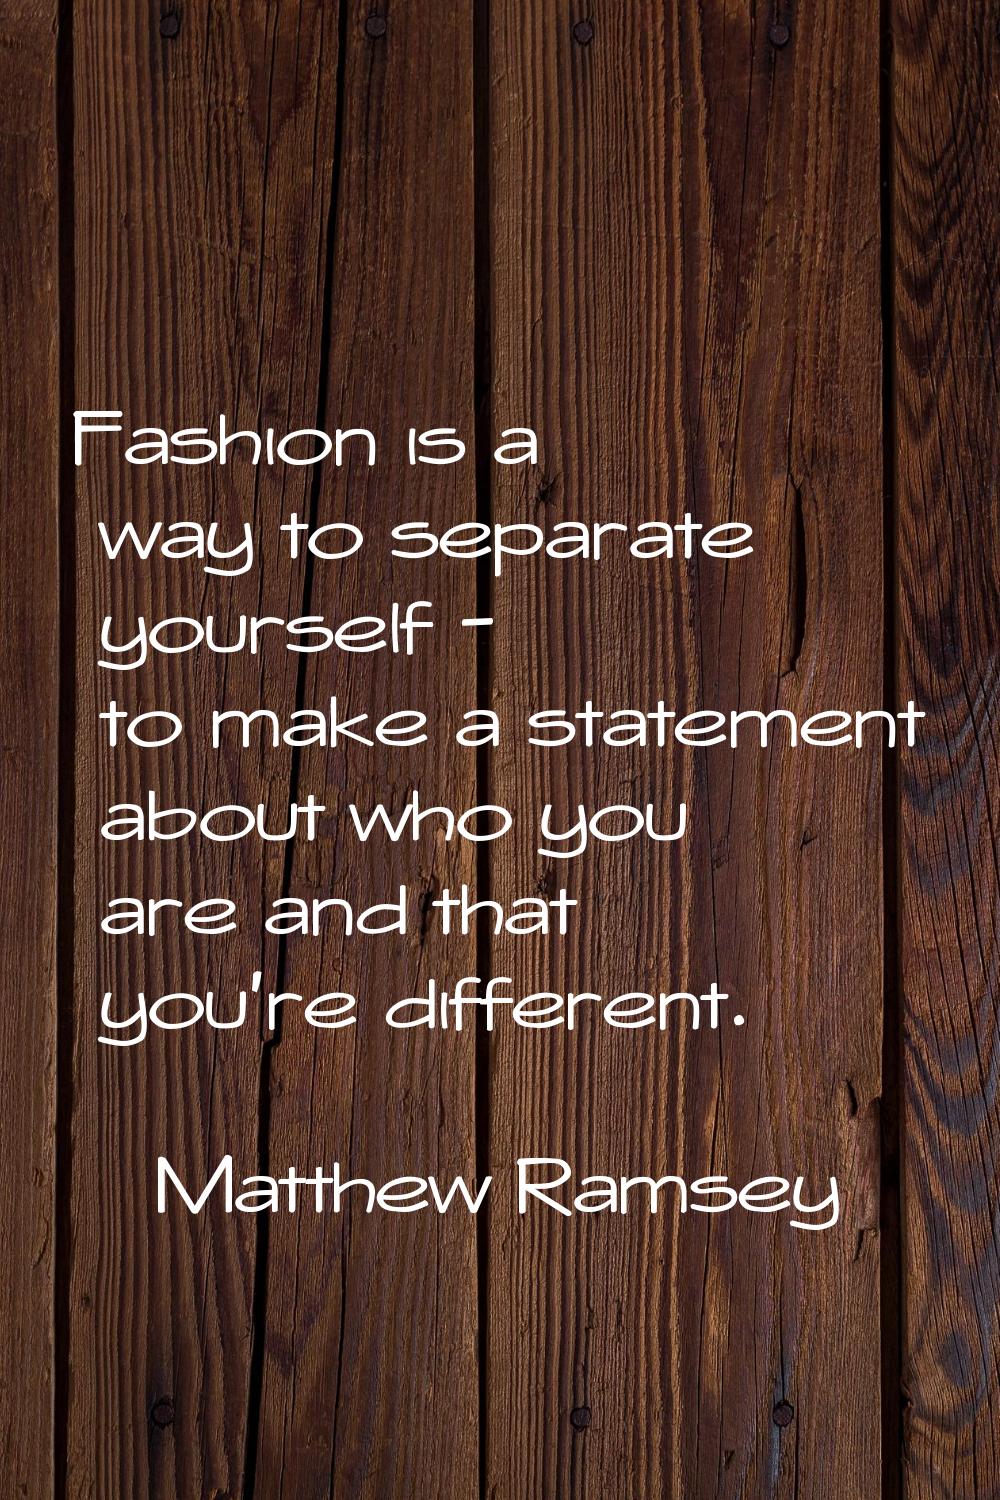 Fashion is a way to separate yourself - to make a statement about who you are and that you're diffe